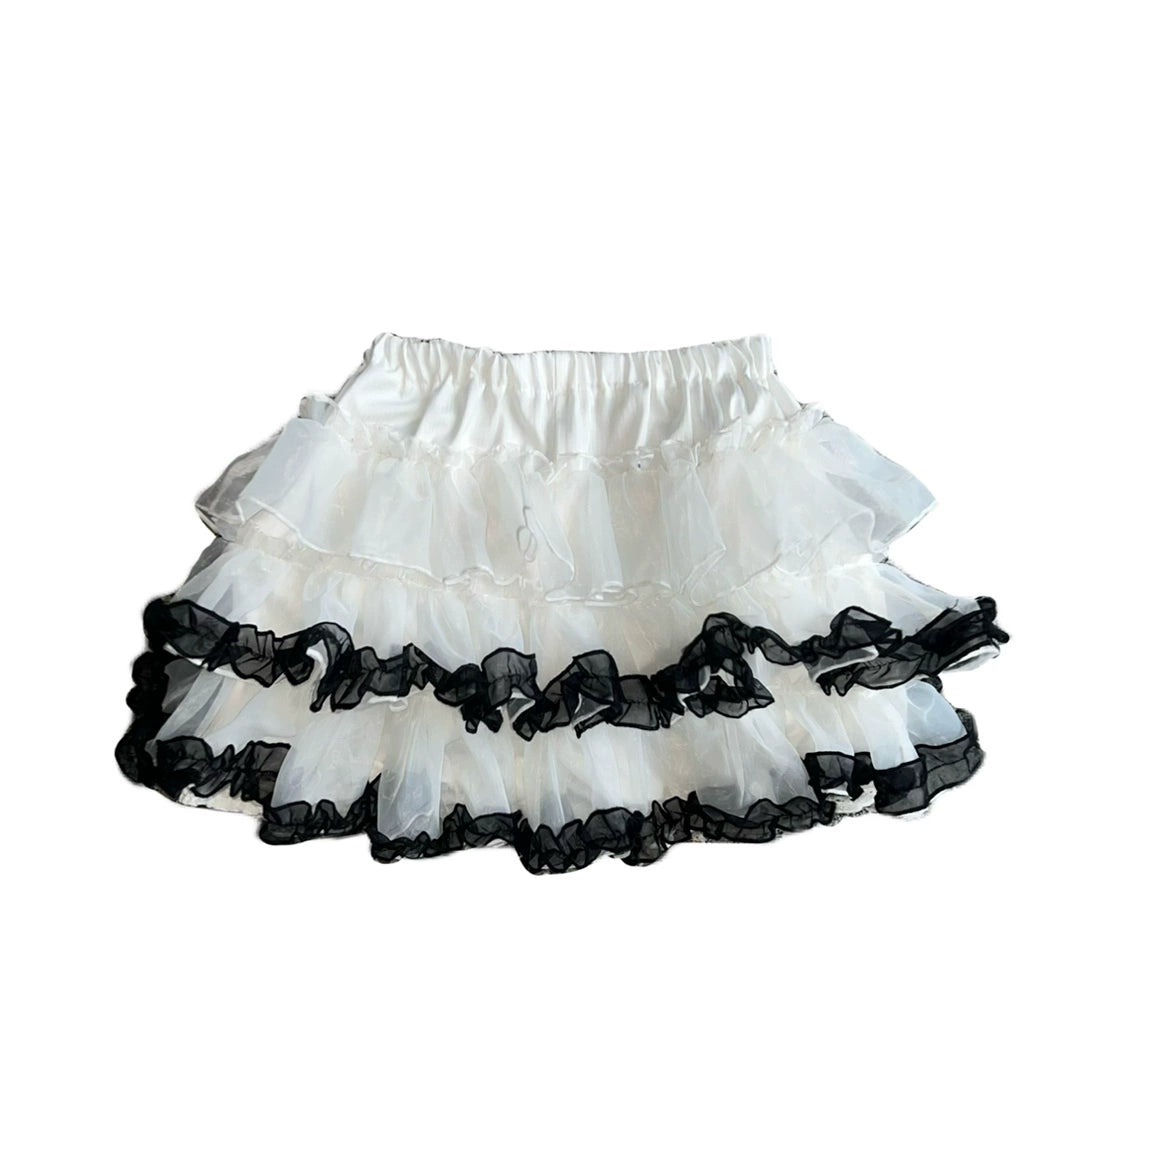 Subculture Skirt Black White Bloomers (White) 36592:561192